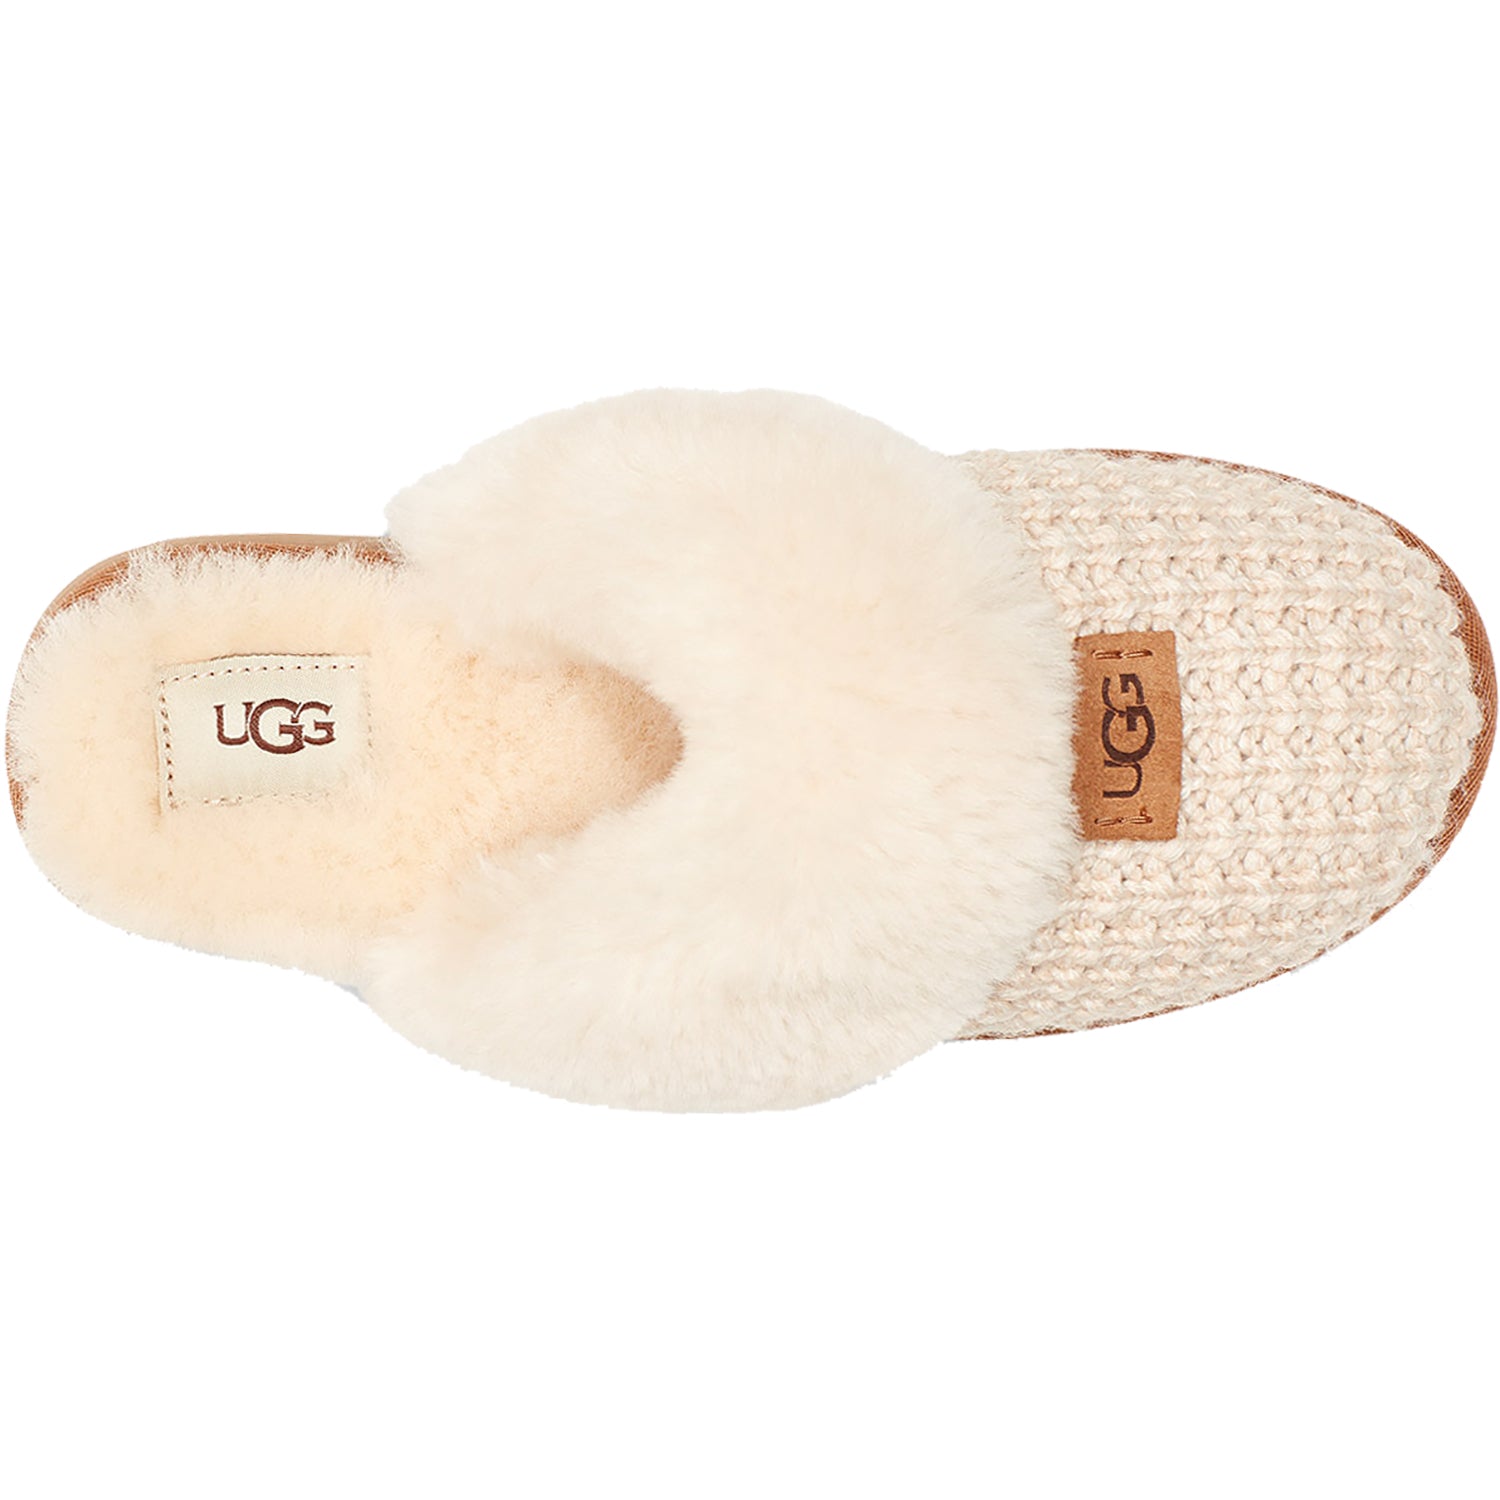 Women's UGG Cozy Slippers | Slippers cozy, Womens uggs, Slippers